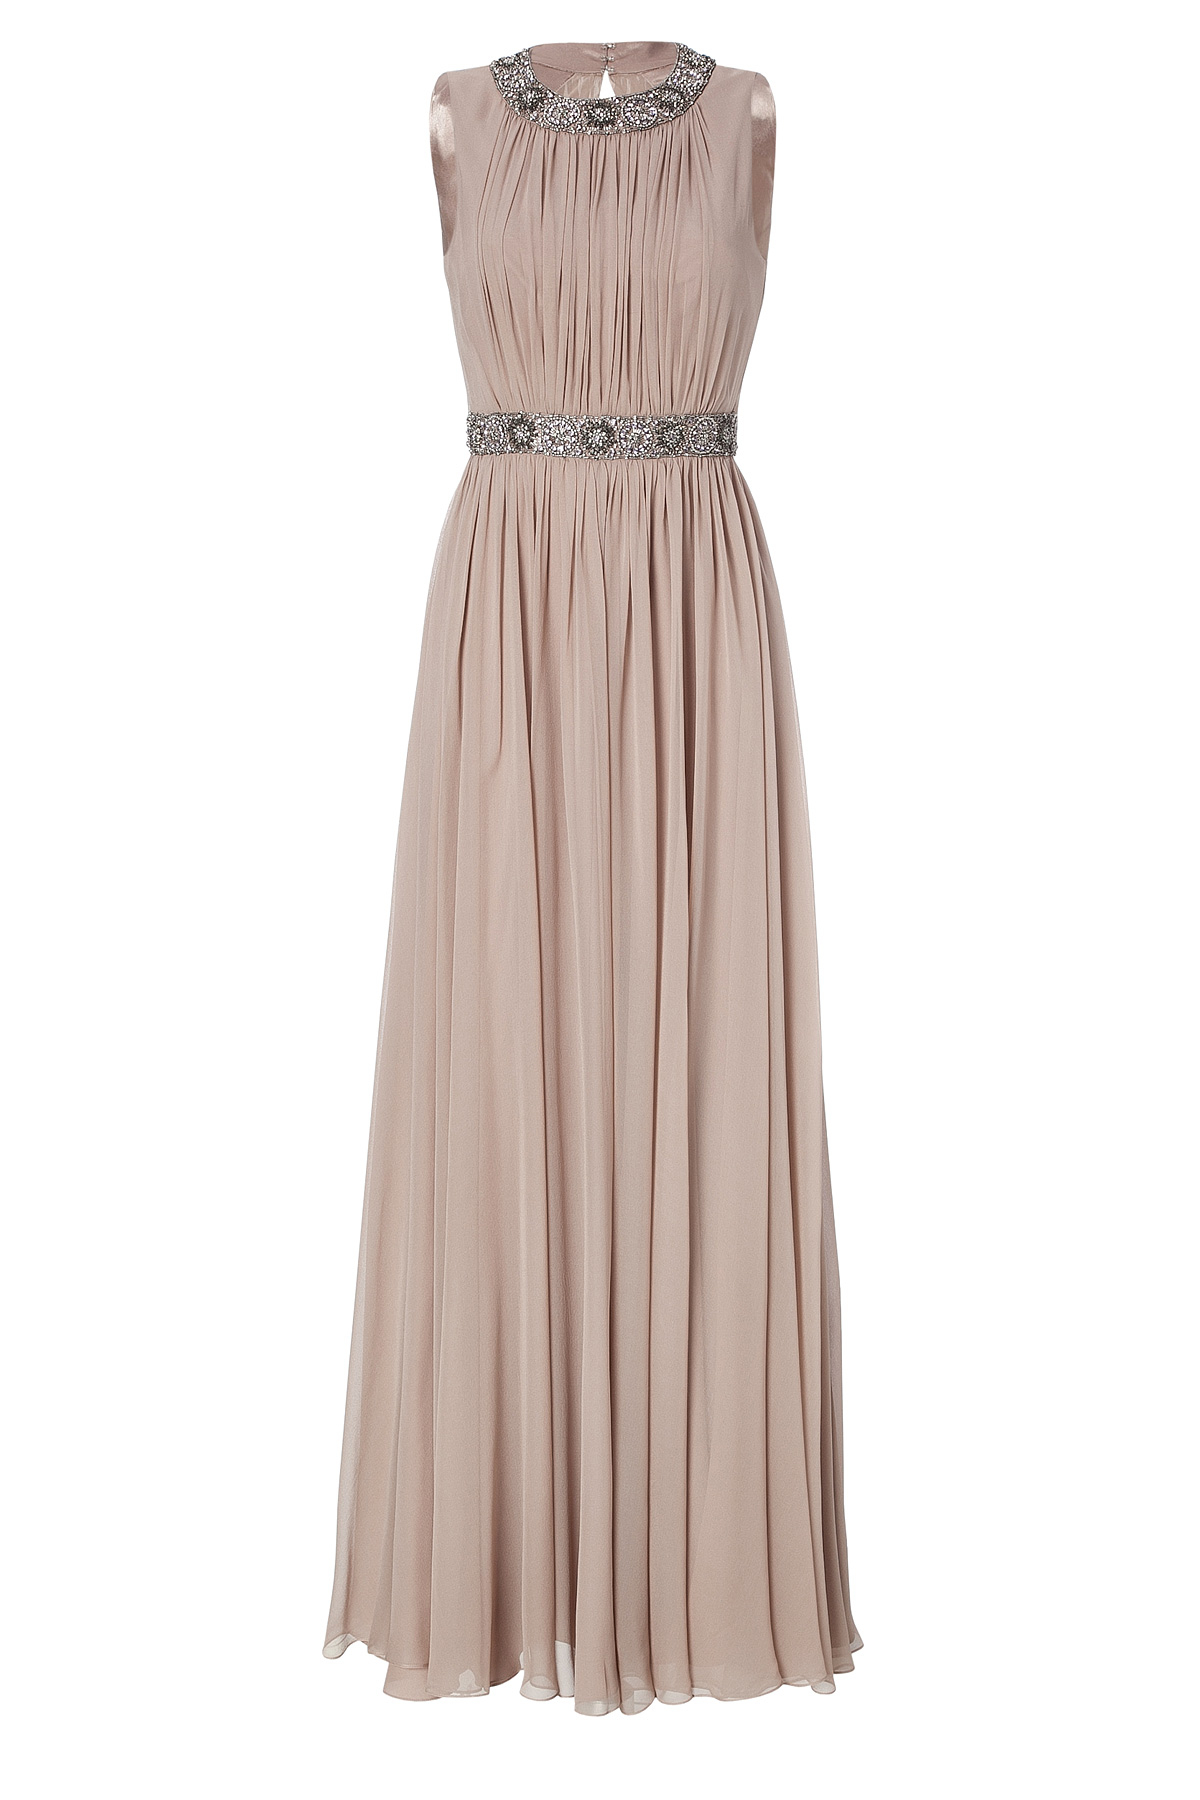 Jenny Packham Nude Silk Evening Dress in Natural - Lyst